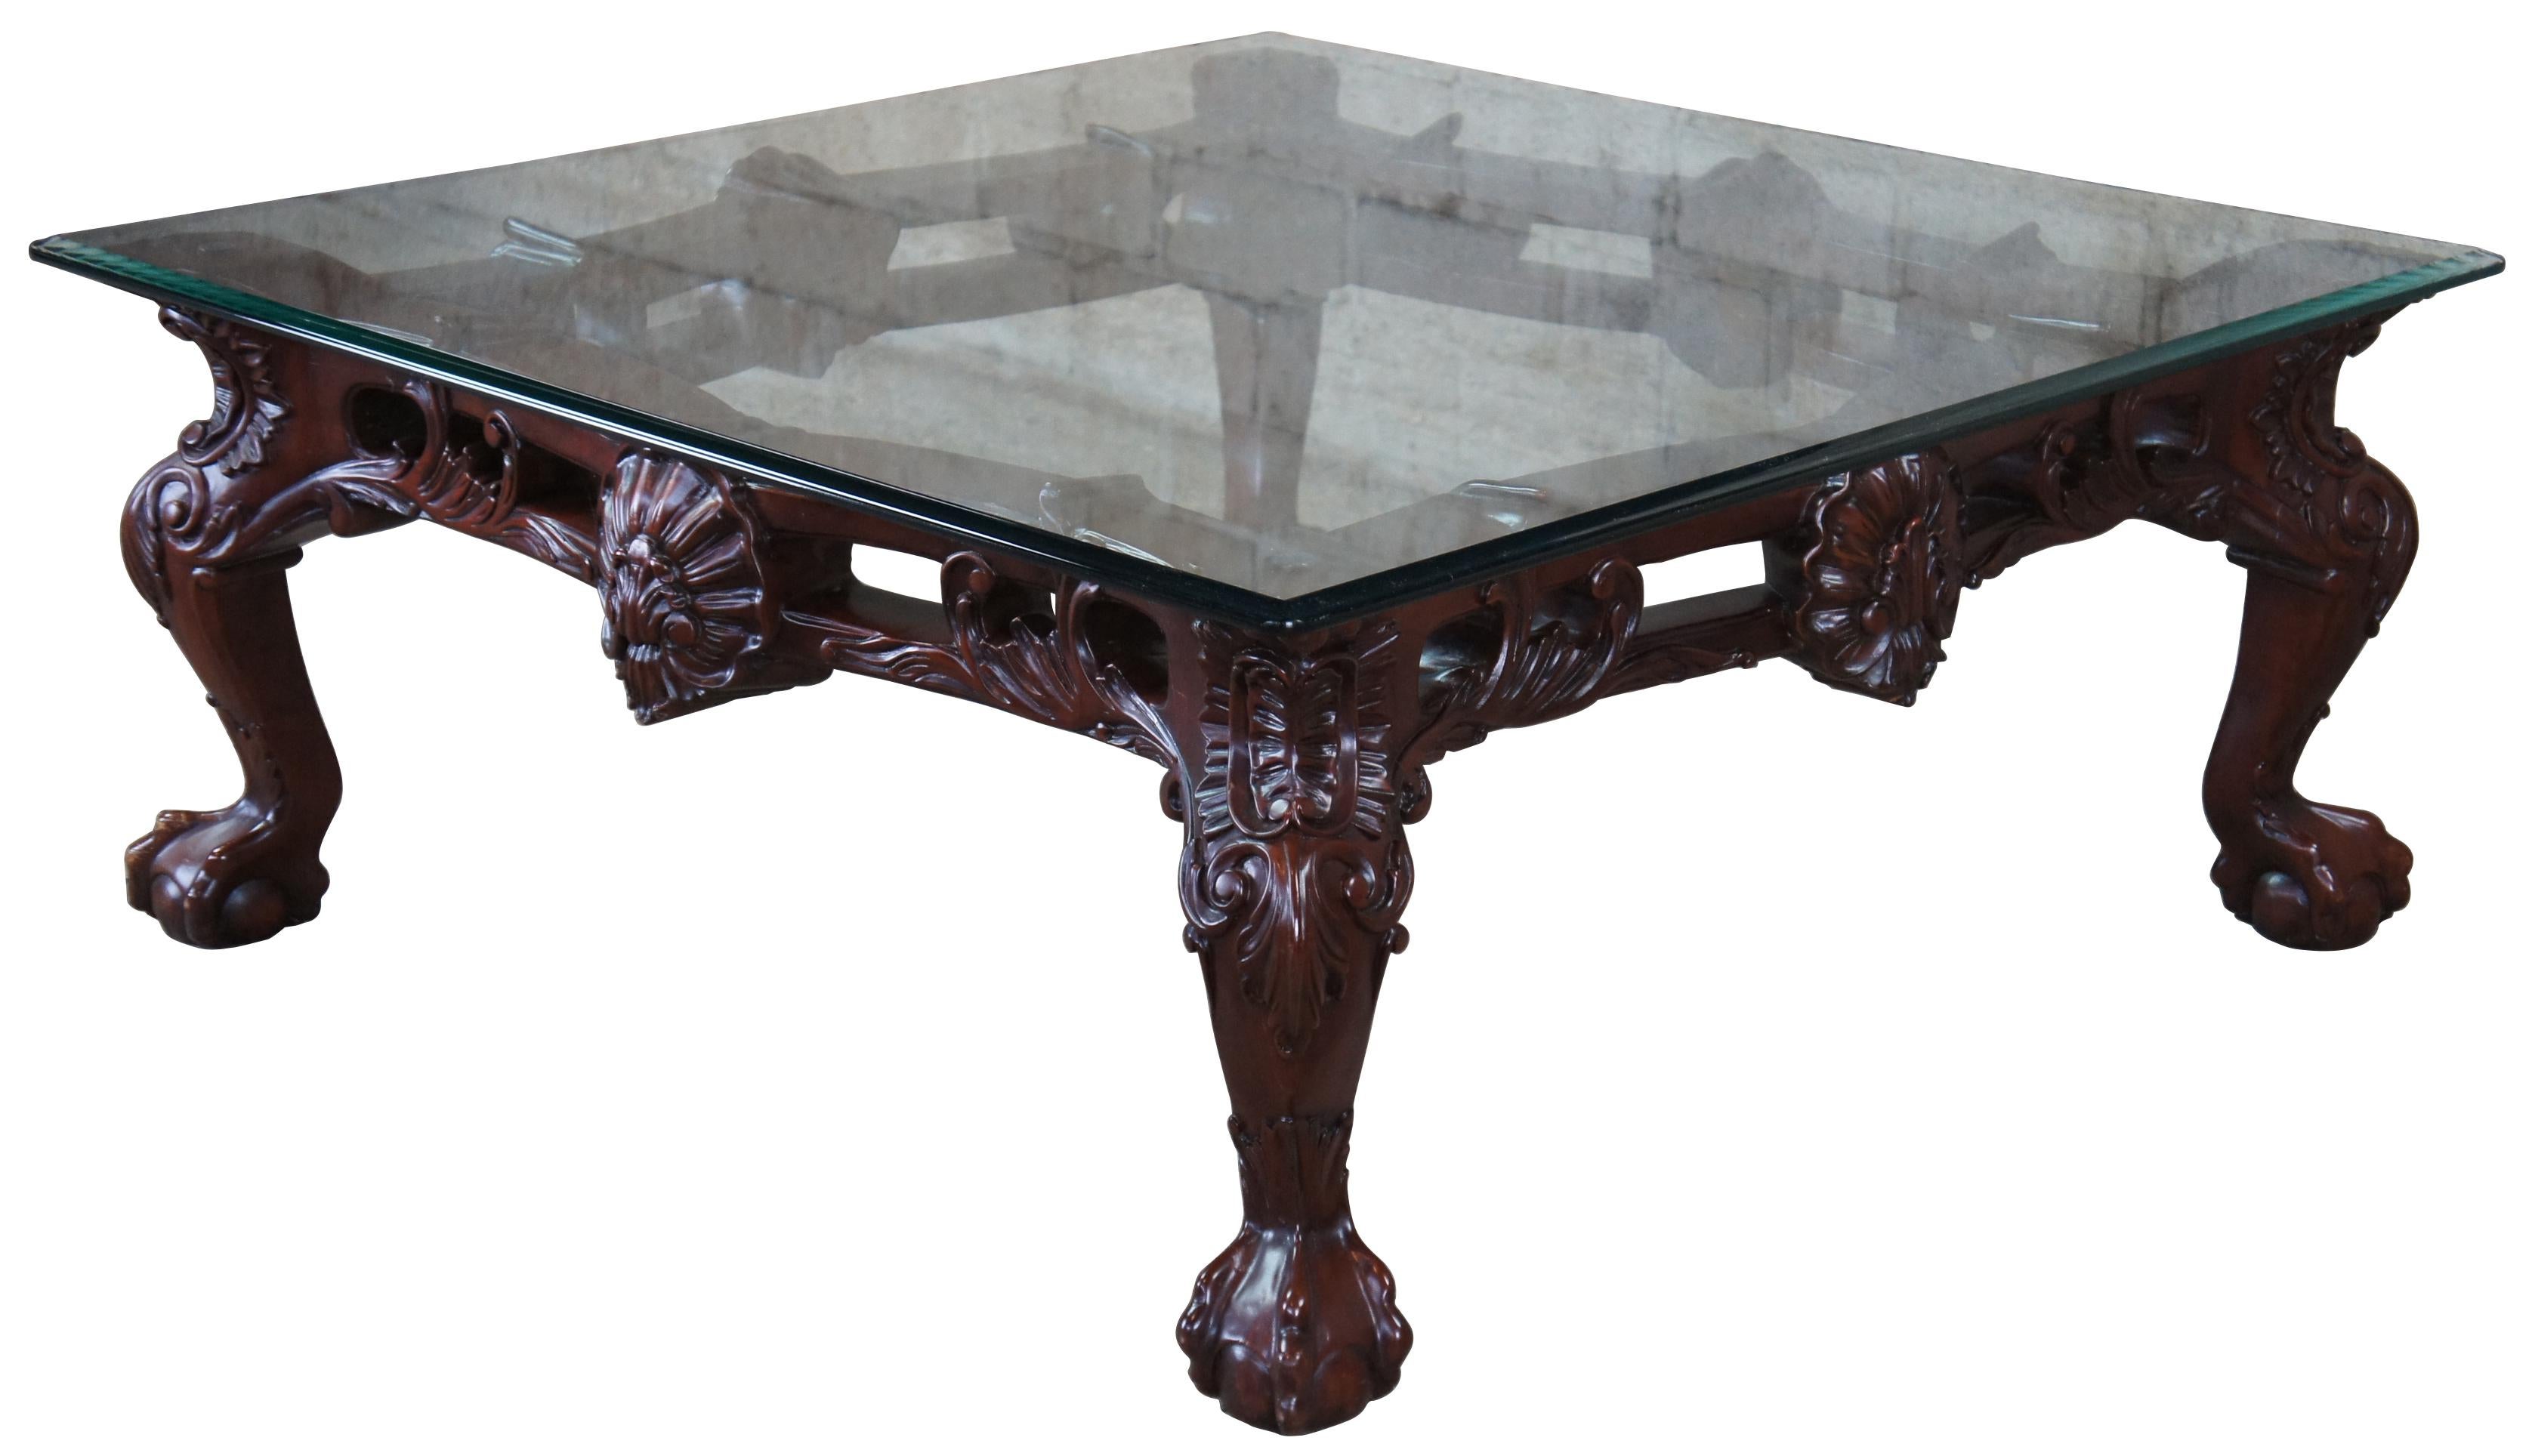 Late 20th century mahogany and glass top coffee table. Features ornate Chippendale styling with scalloped accents, scrolled legs, and ball and claw feet.
  